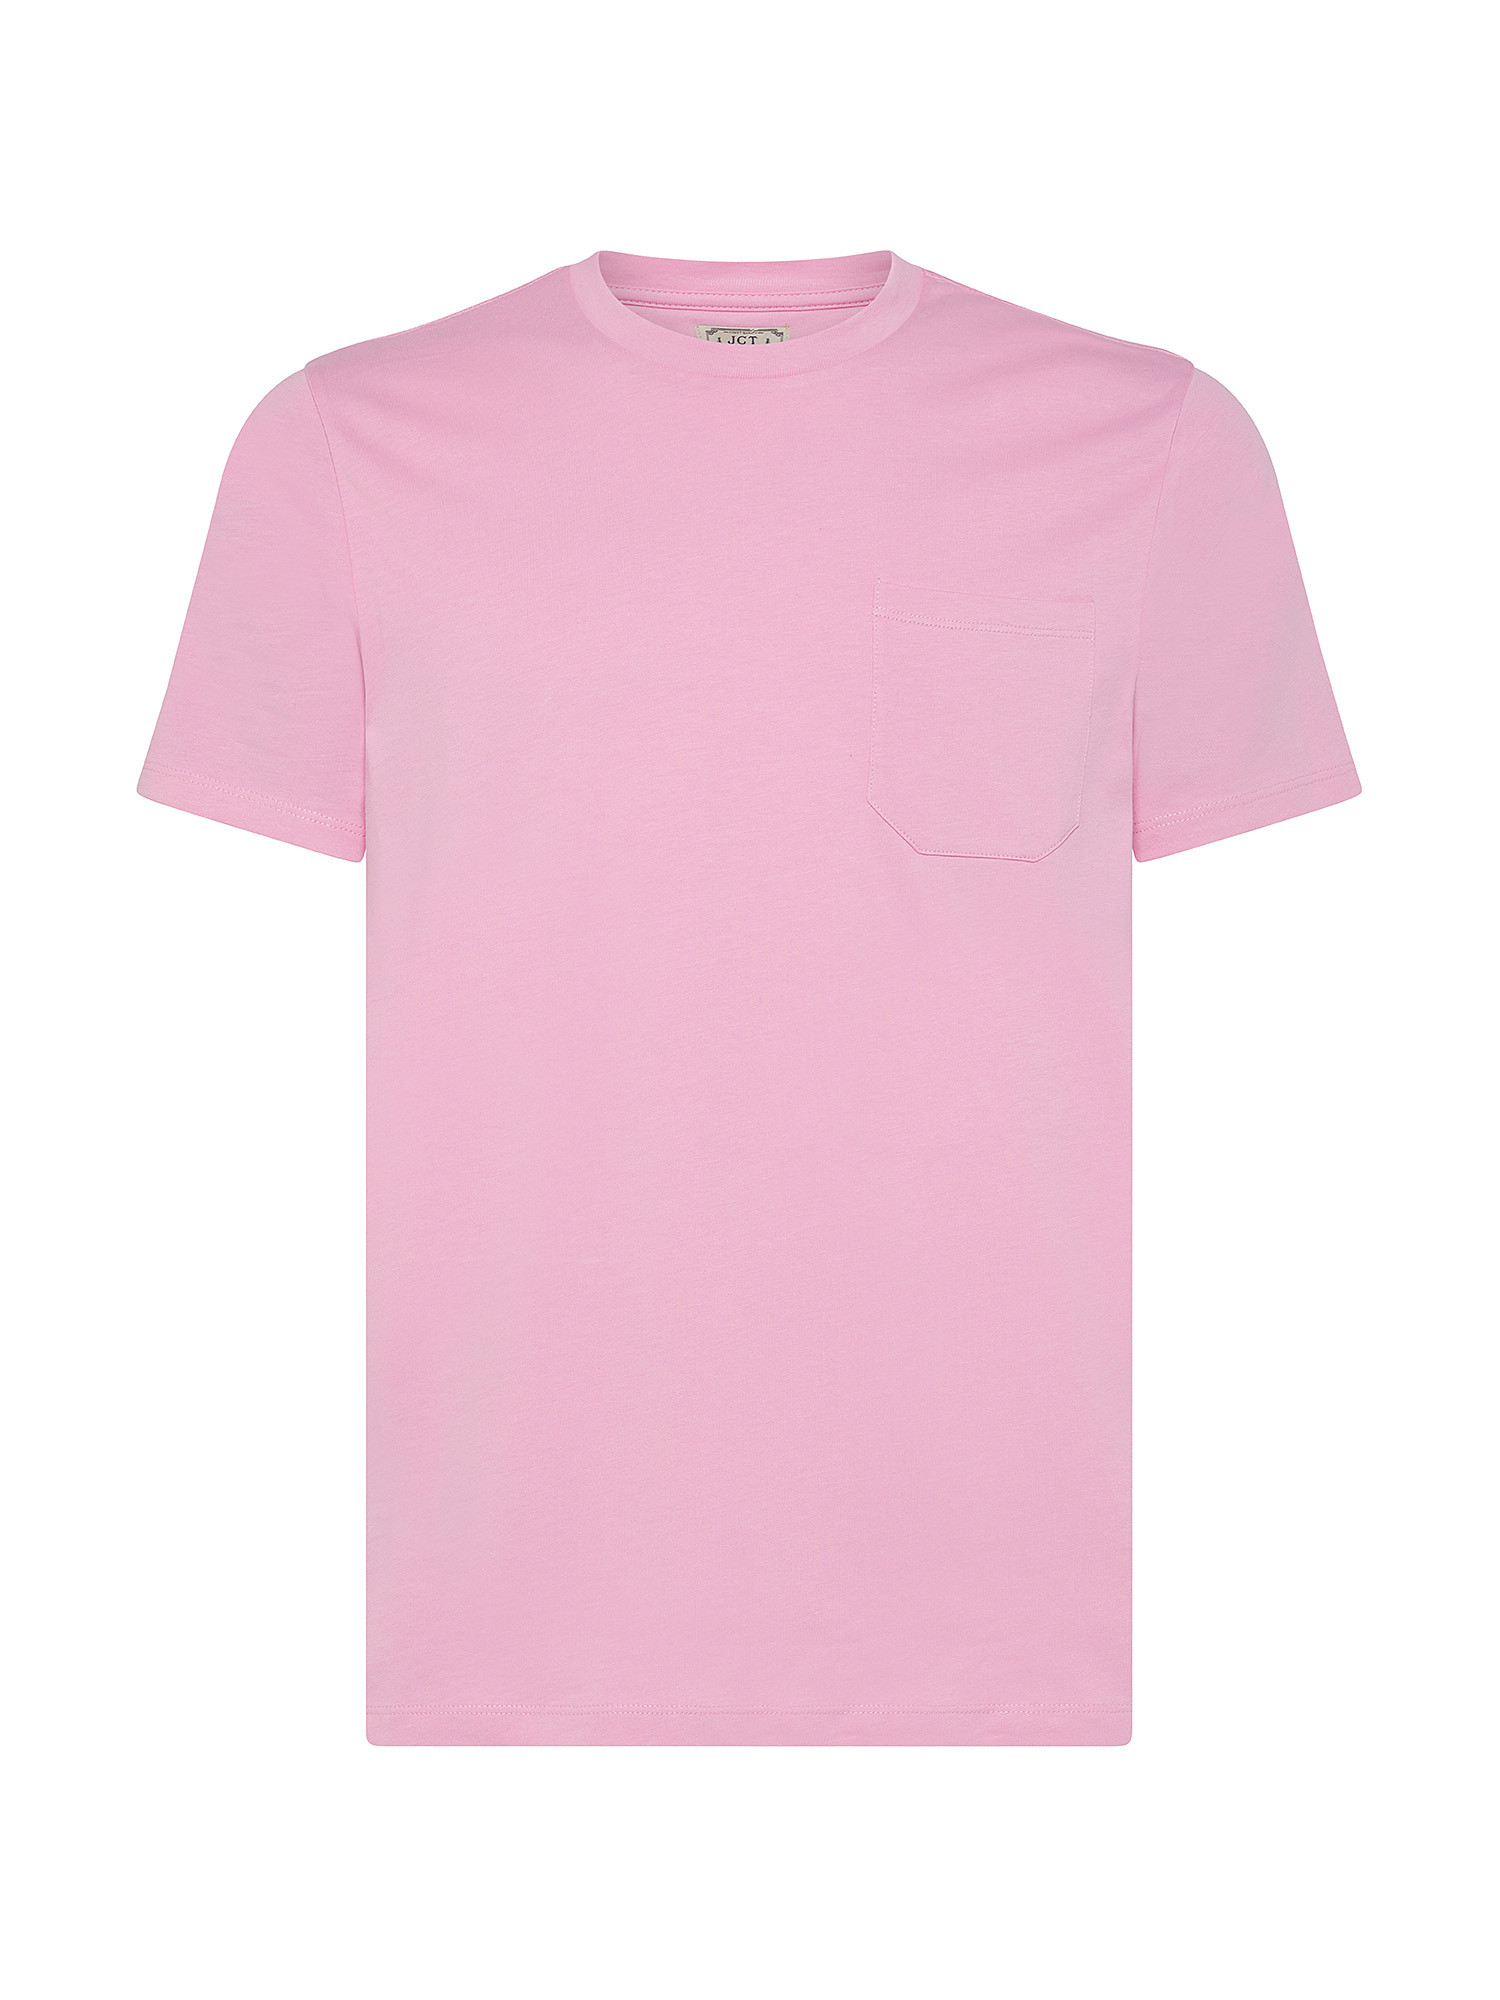 JCT - T-shirt in puro cotone supima, Rosa, large image number 0